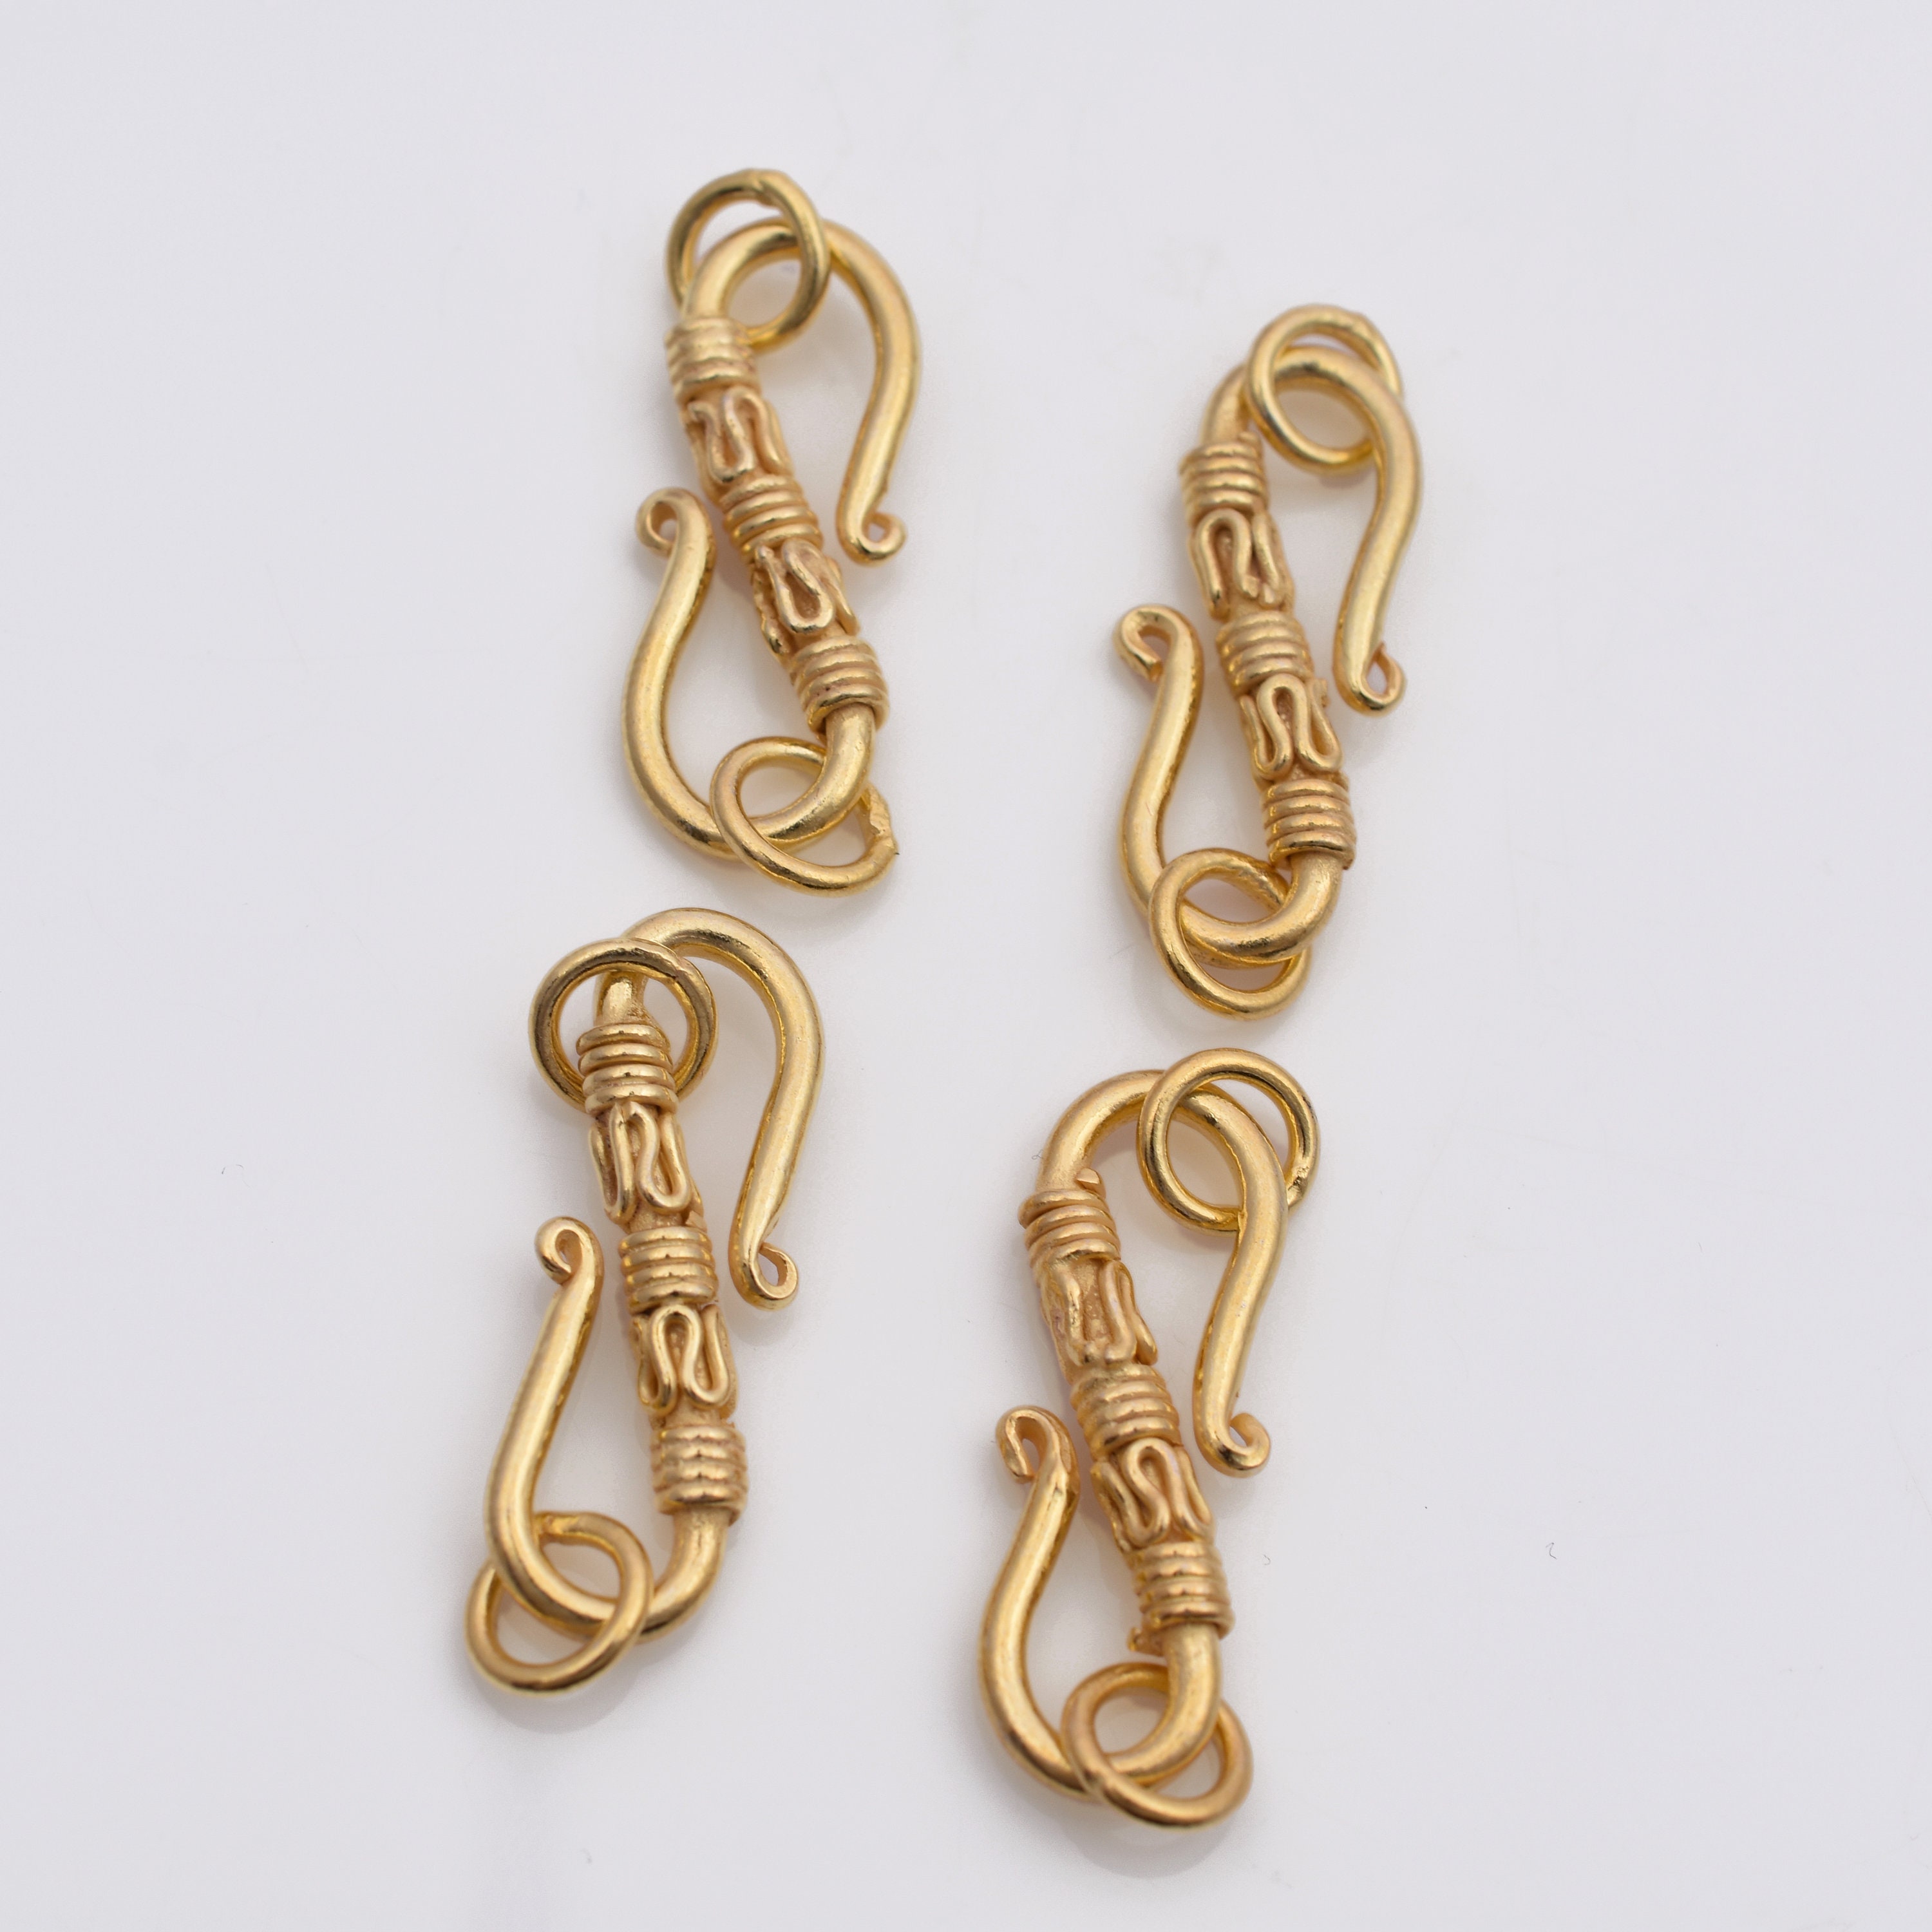 4 Magnetic Clasp Fold Over Antique Gold Magnetic Clasps Closures Jewelry  Clasps Bracelet Clasps 1209 